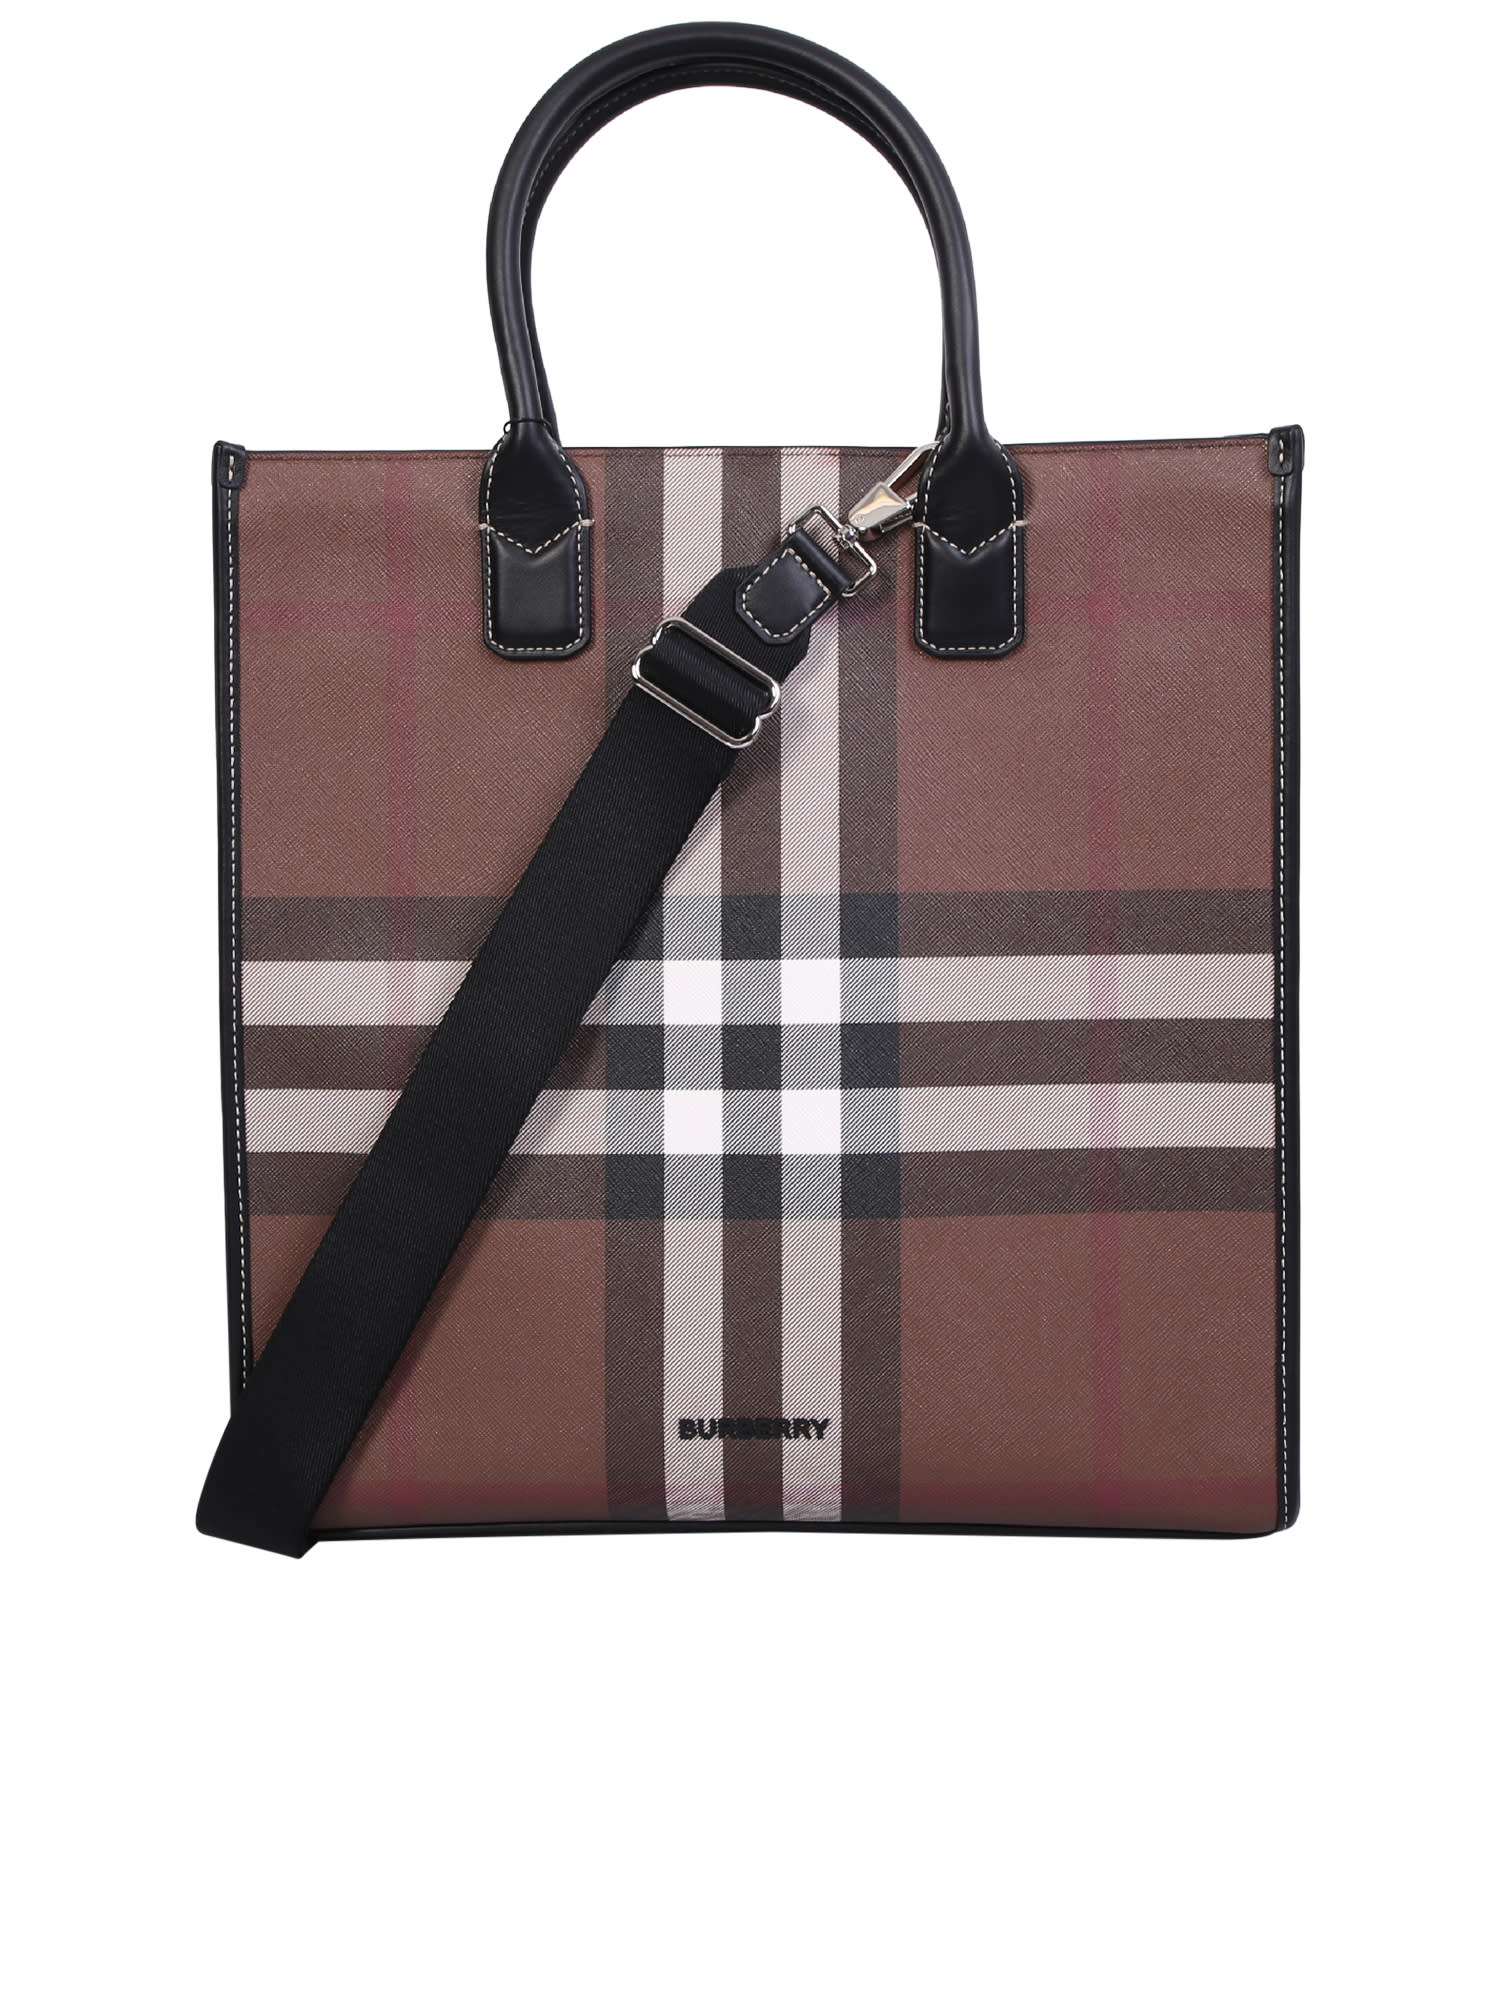 Burberry Men's Check Wool and Leather Shopper Tote Bag